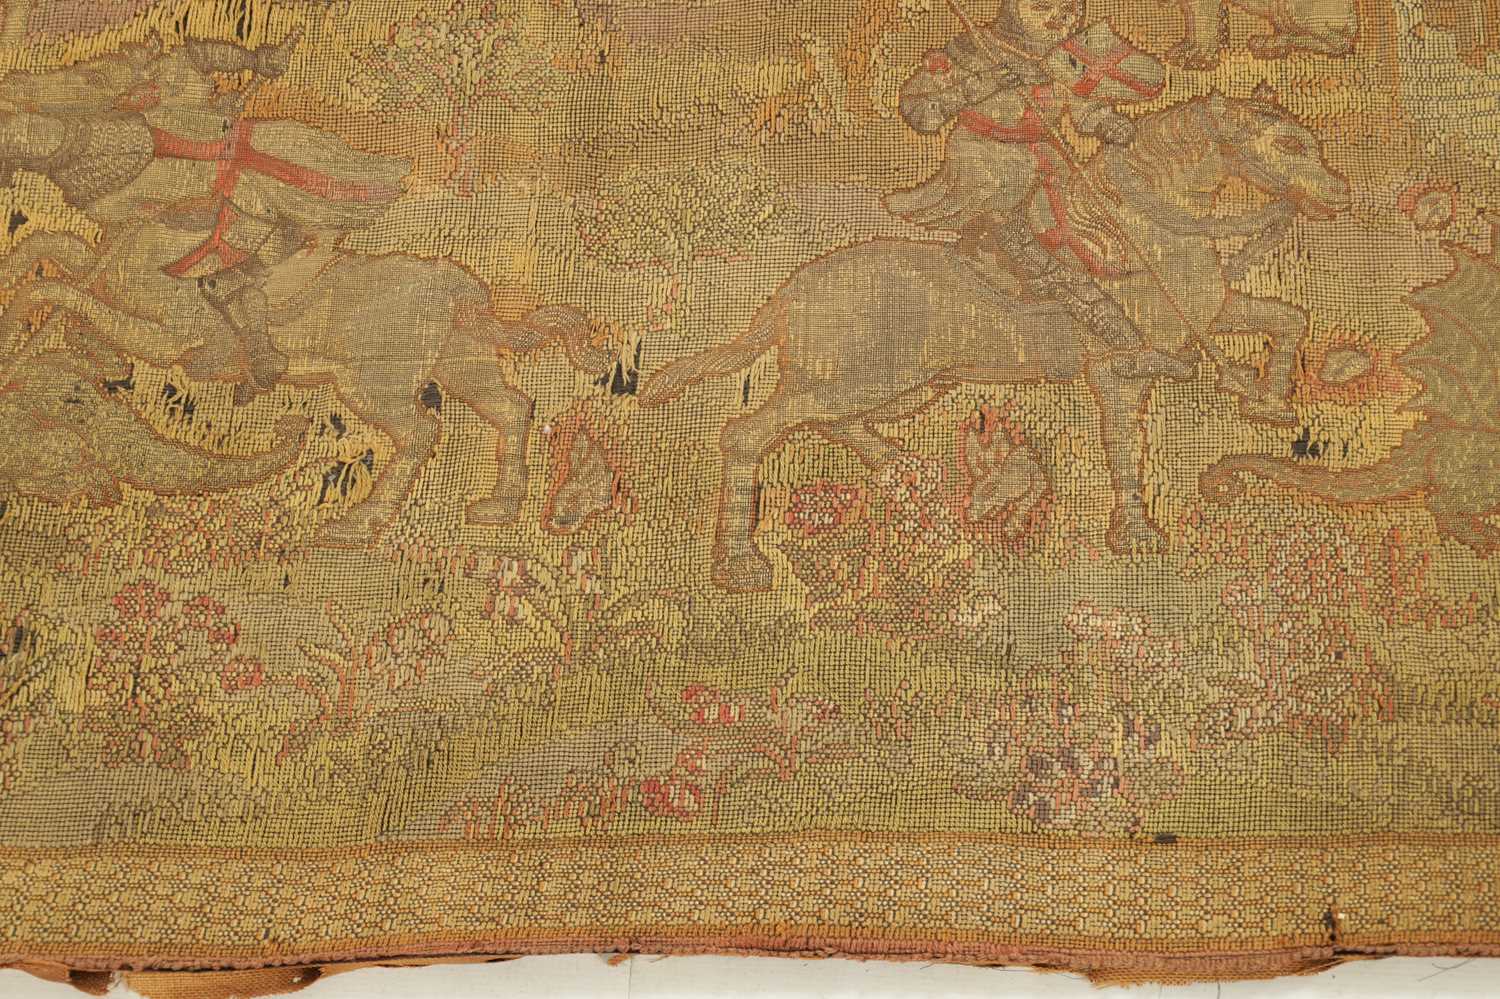 AN 18TH CENTURY WALL HANGING TAPESTRY - Image 6 of 7